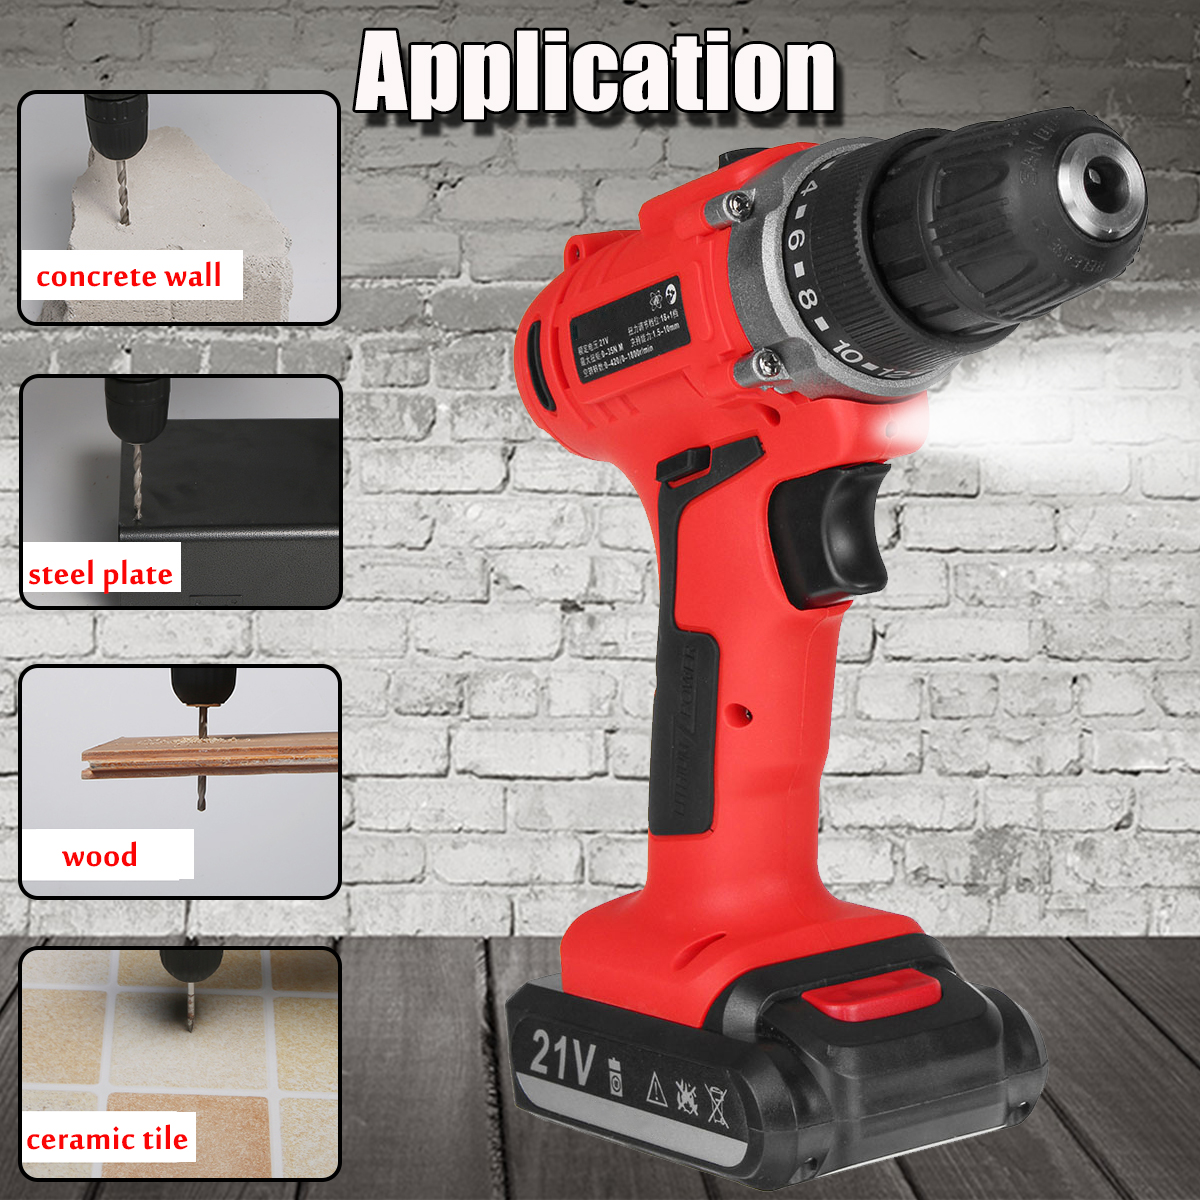 300W-21V-LED-Cordless-Electric-Drill-Screwdriver-1500mAh-Rechargeable-Li-Ion-Battery-Repair-Tools-1421882-3